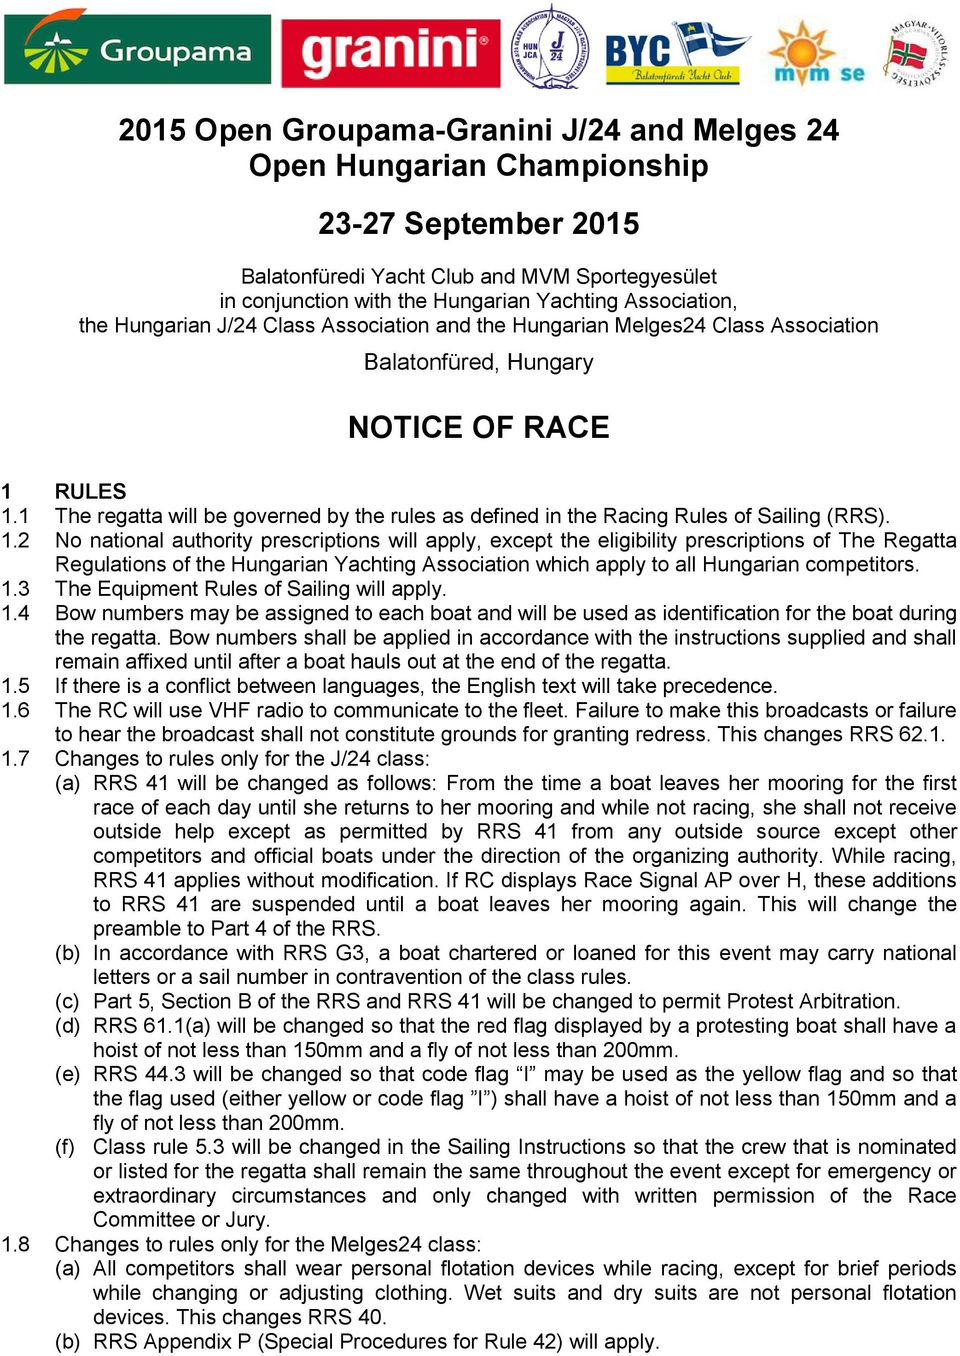 1 The regatta will be governed by the rules as defined in the Racing Rules of Sailing (RRS). 1.